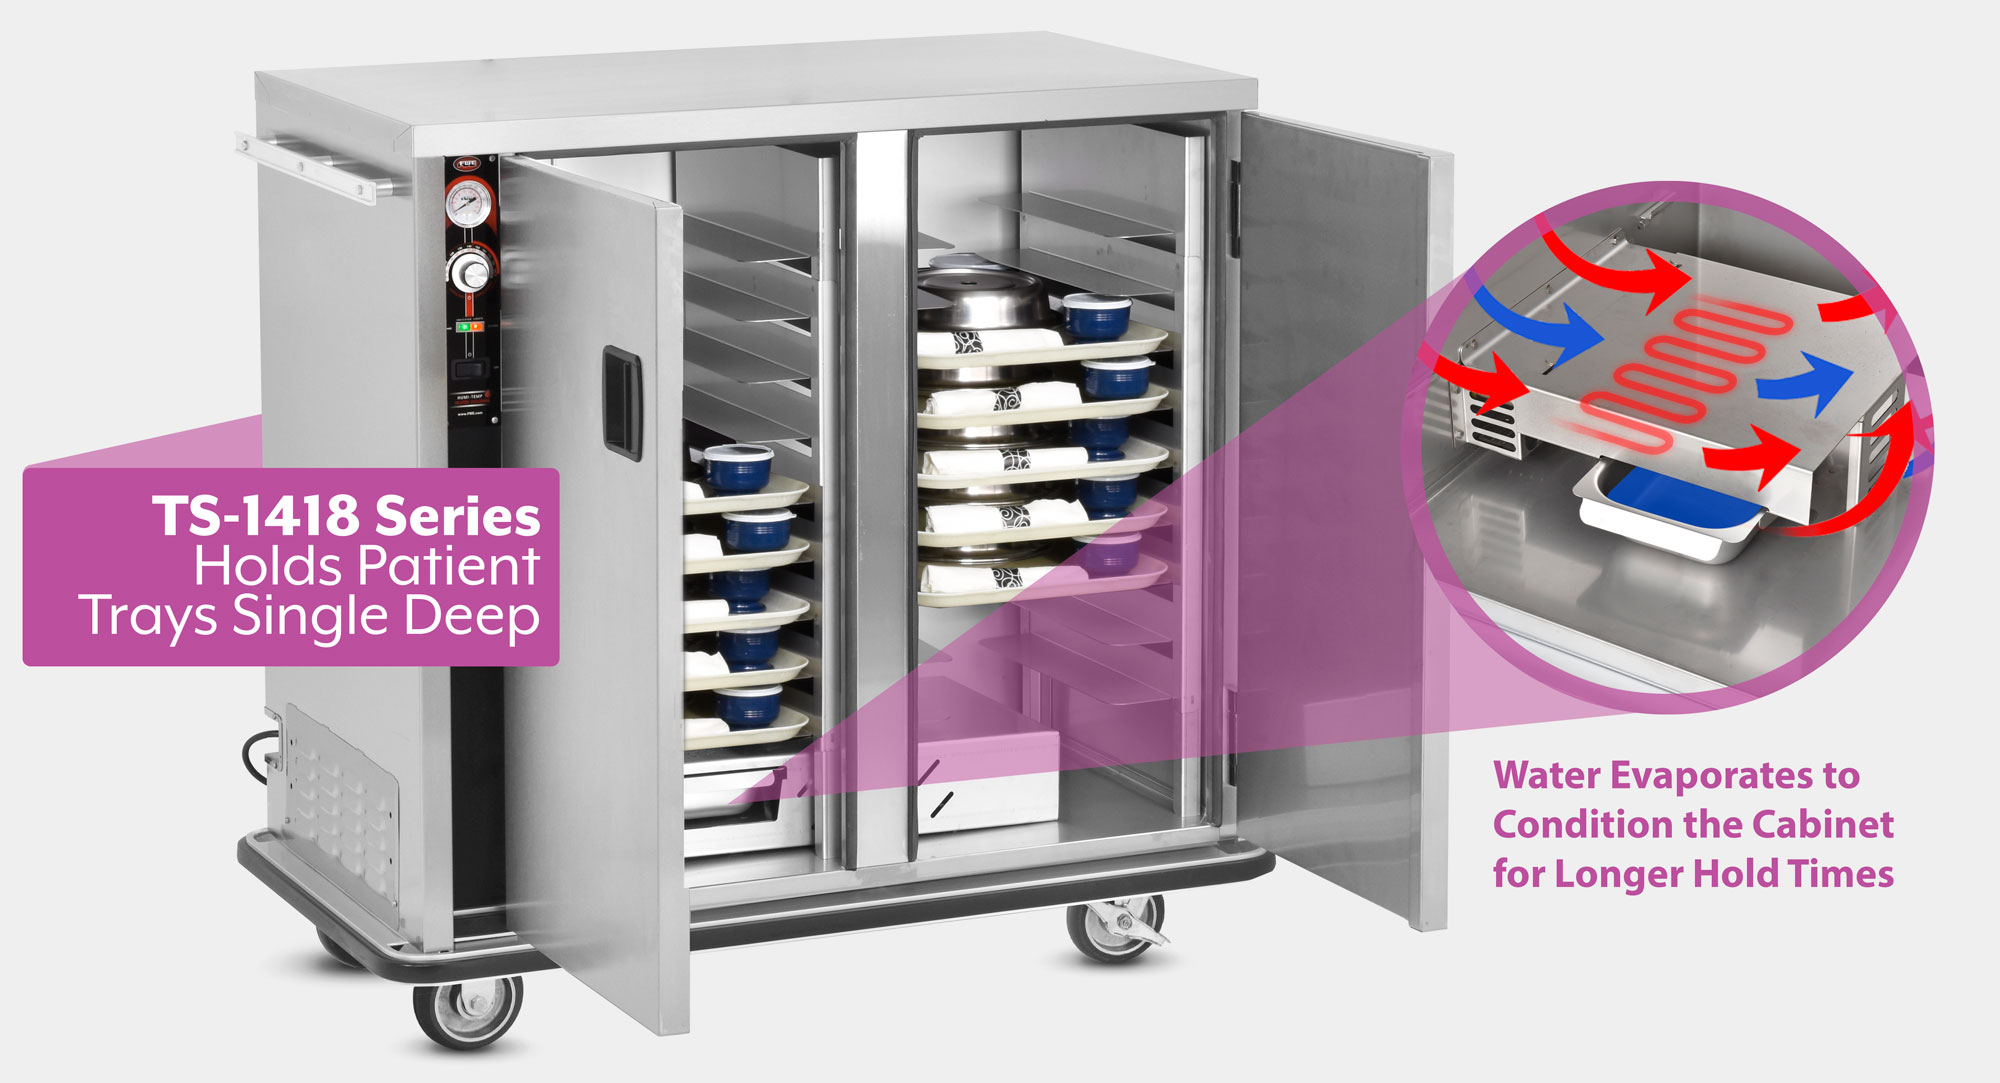 TS-1418 Series: Humi-Temp Heated Holding Patient Tray Cabinet, Holds Single Deep Trays